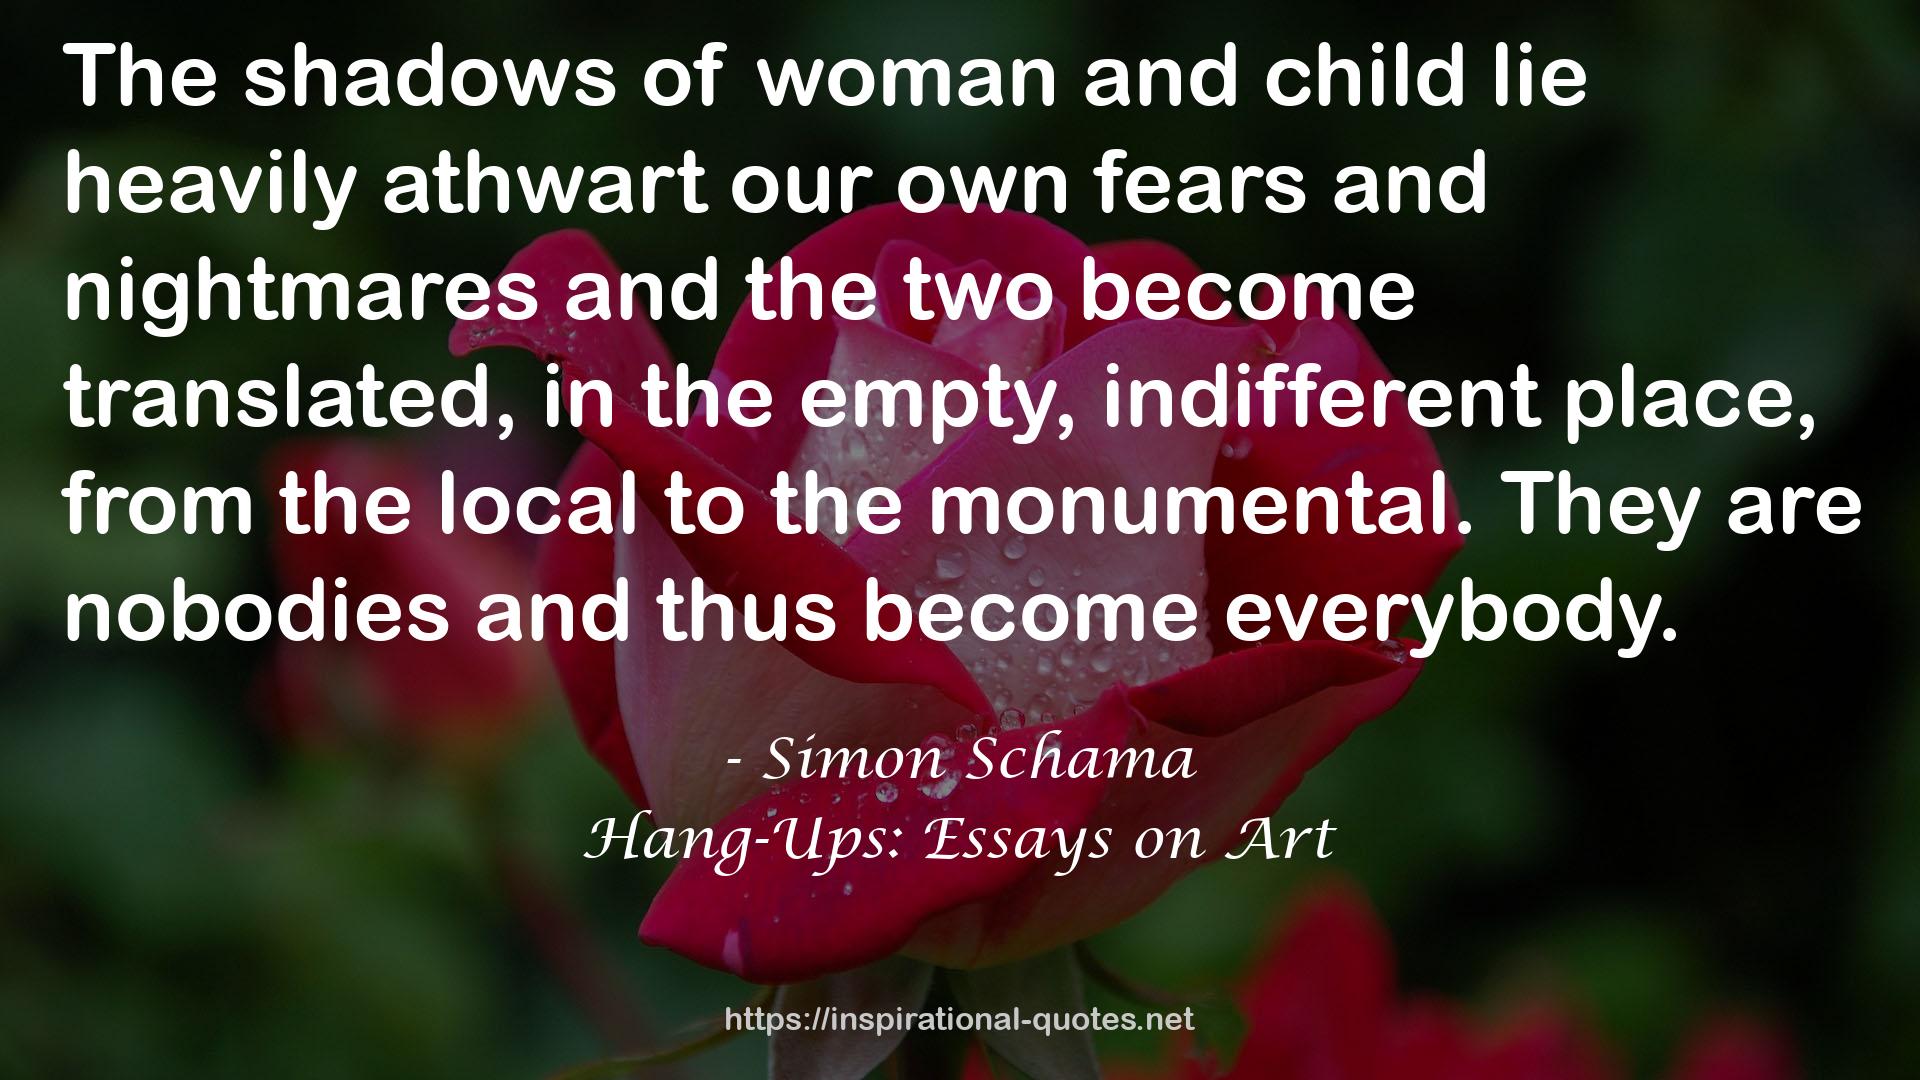 Hang-Ups: Essays on Art QUOTES